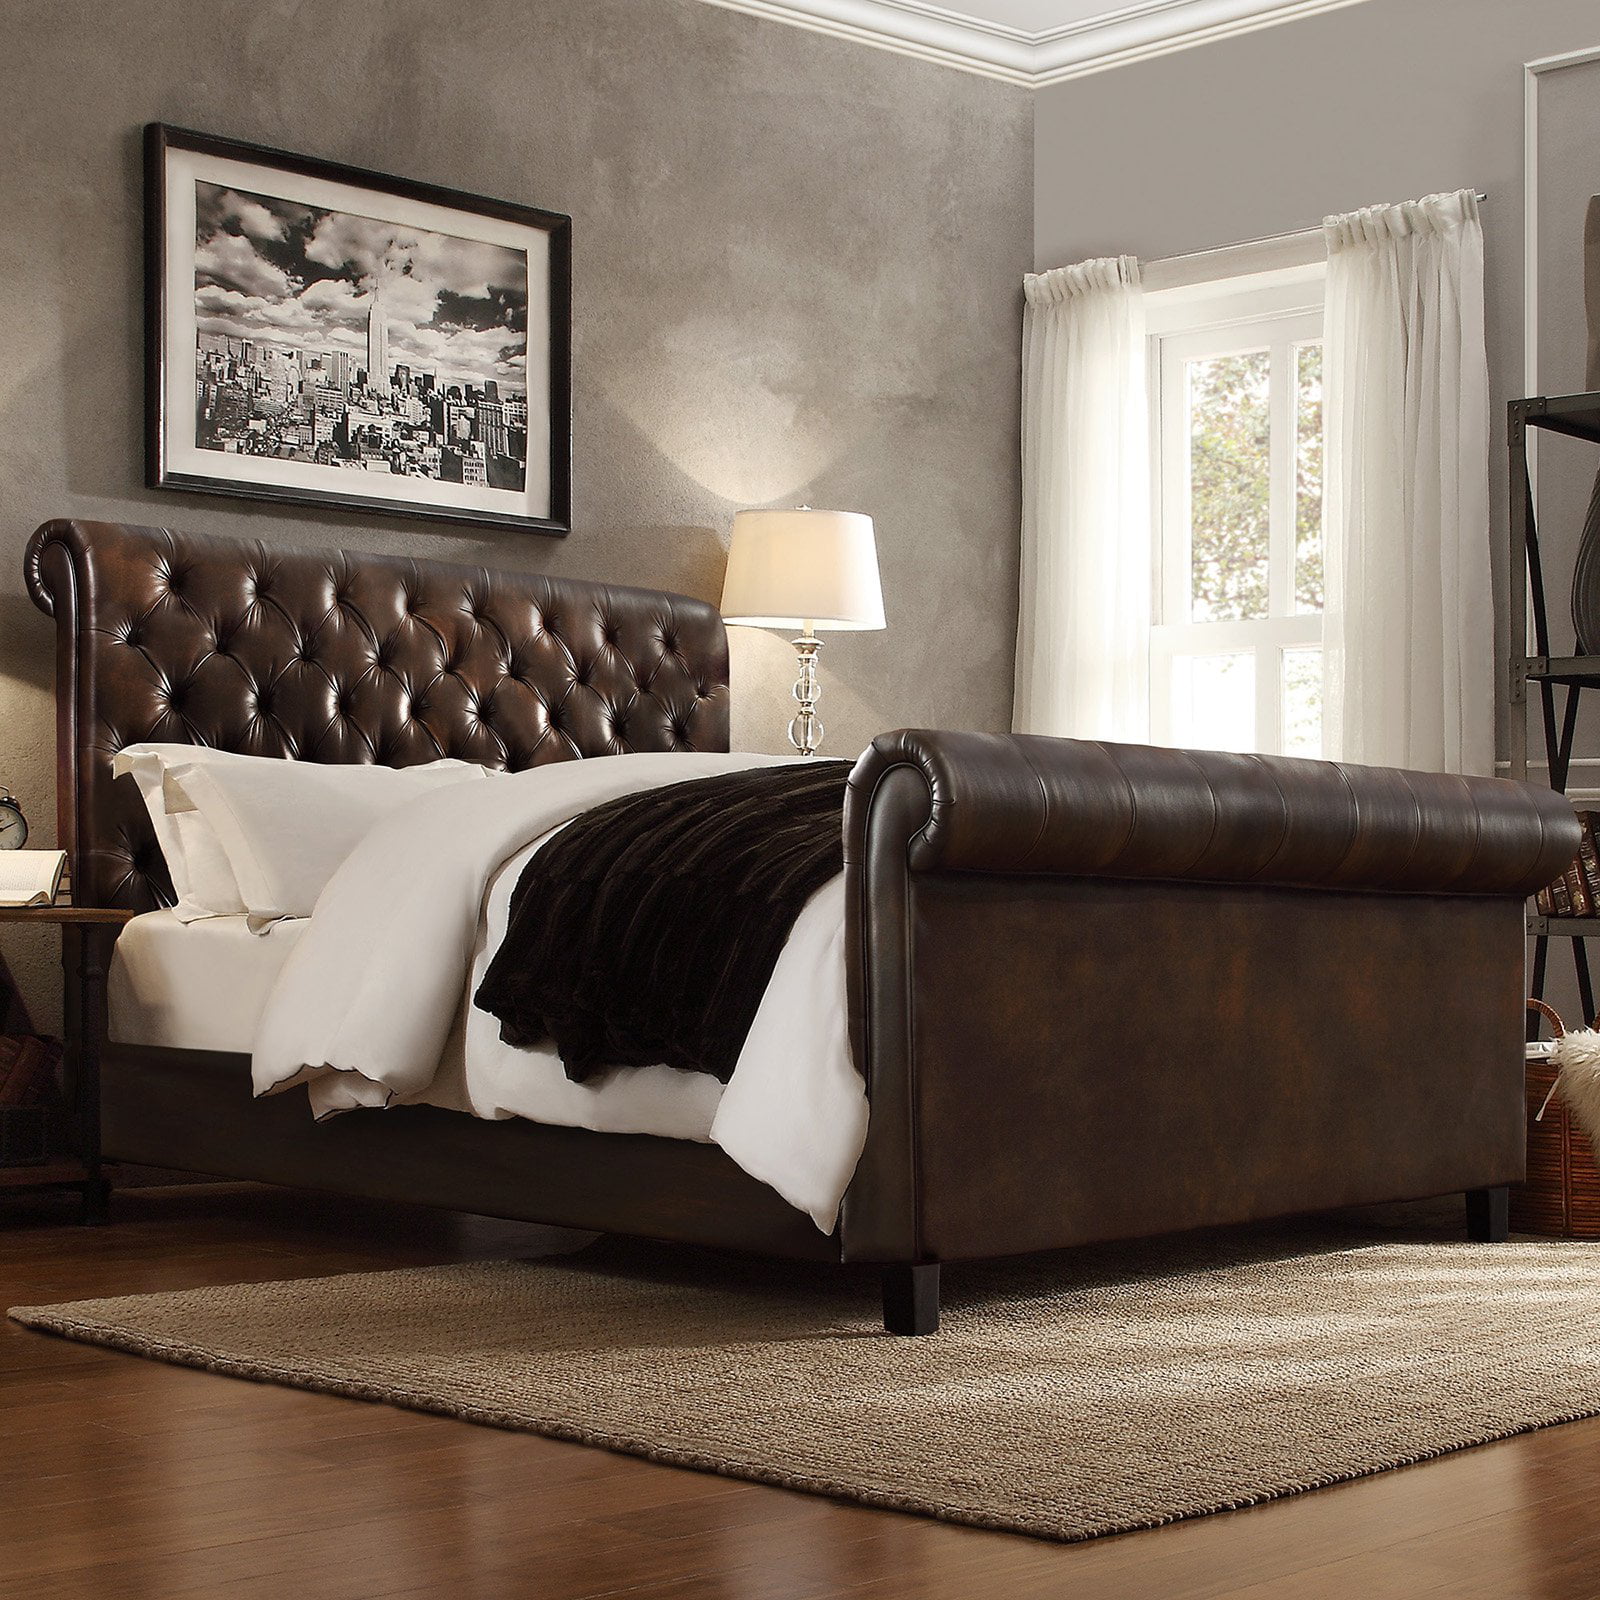 Weston Home Dartford Upholstered Faux, Leather Slay Bed